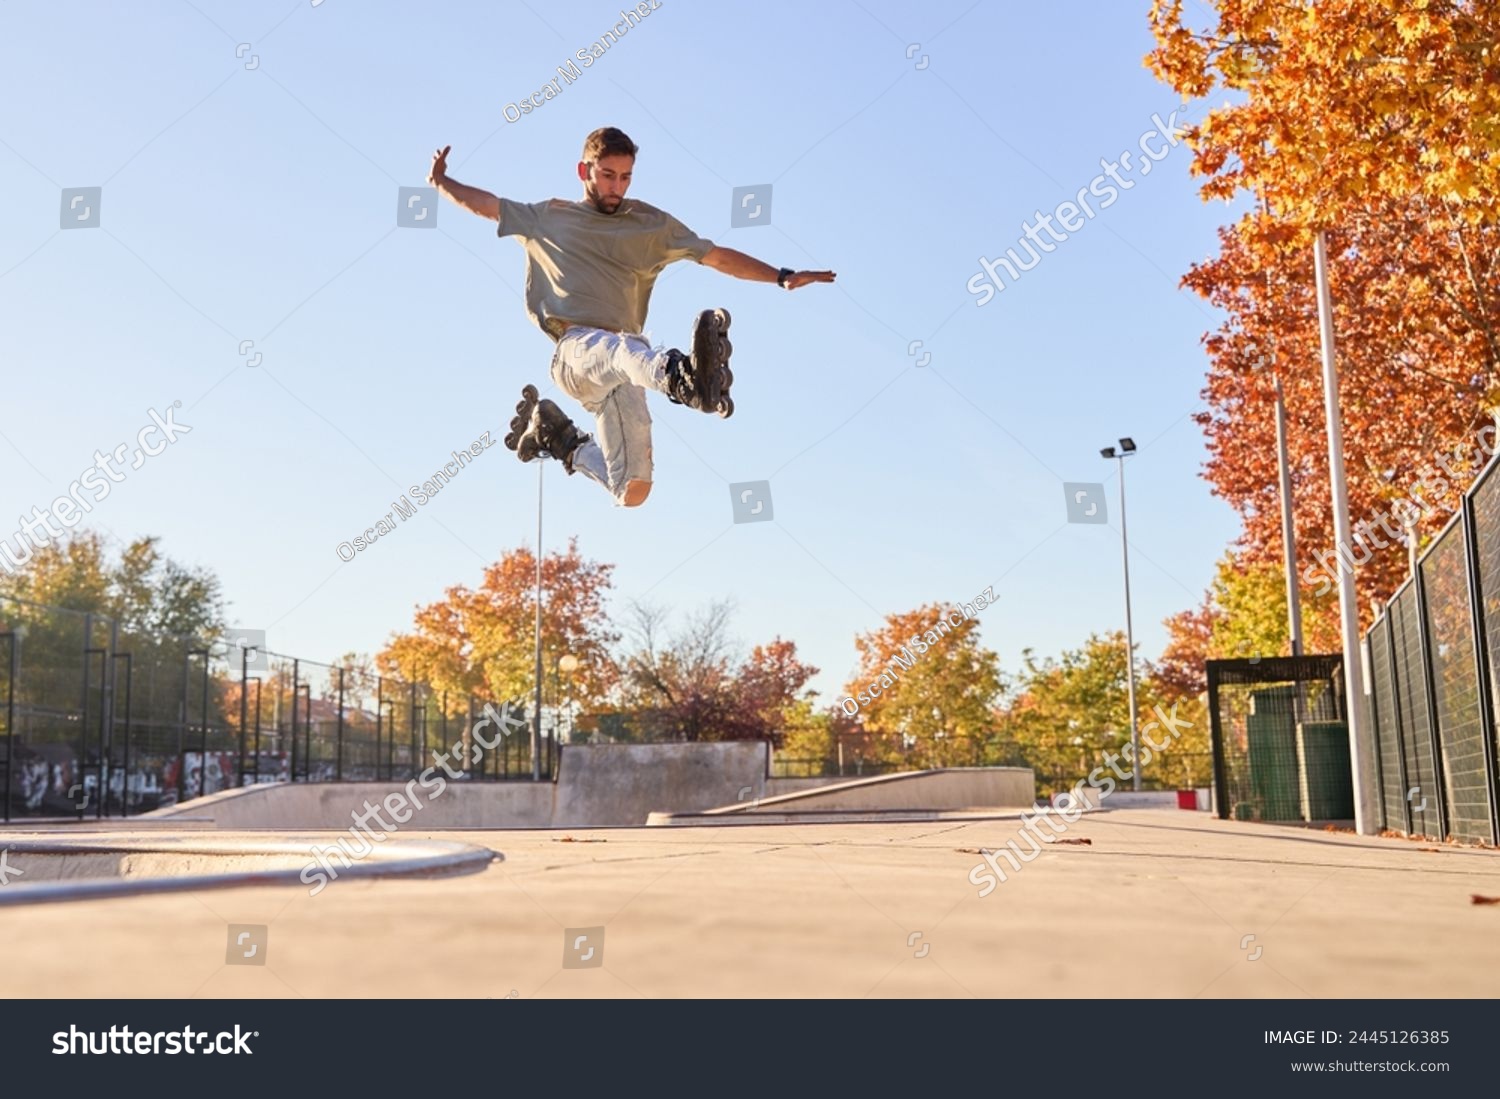 young male roller skater jumping and doing a trick with his inline skates. #2445126385